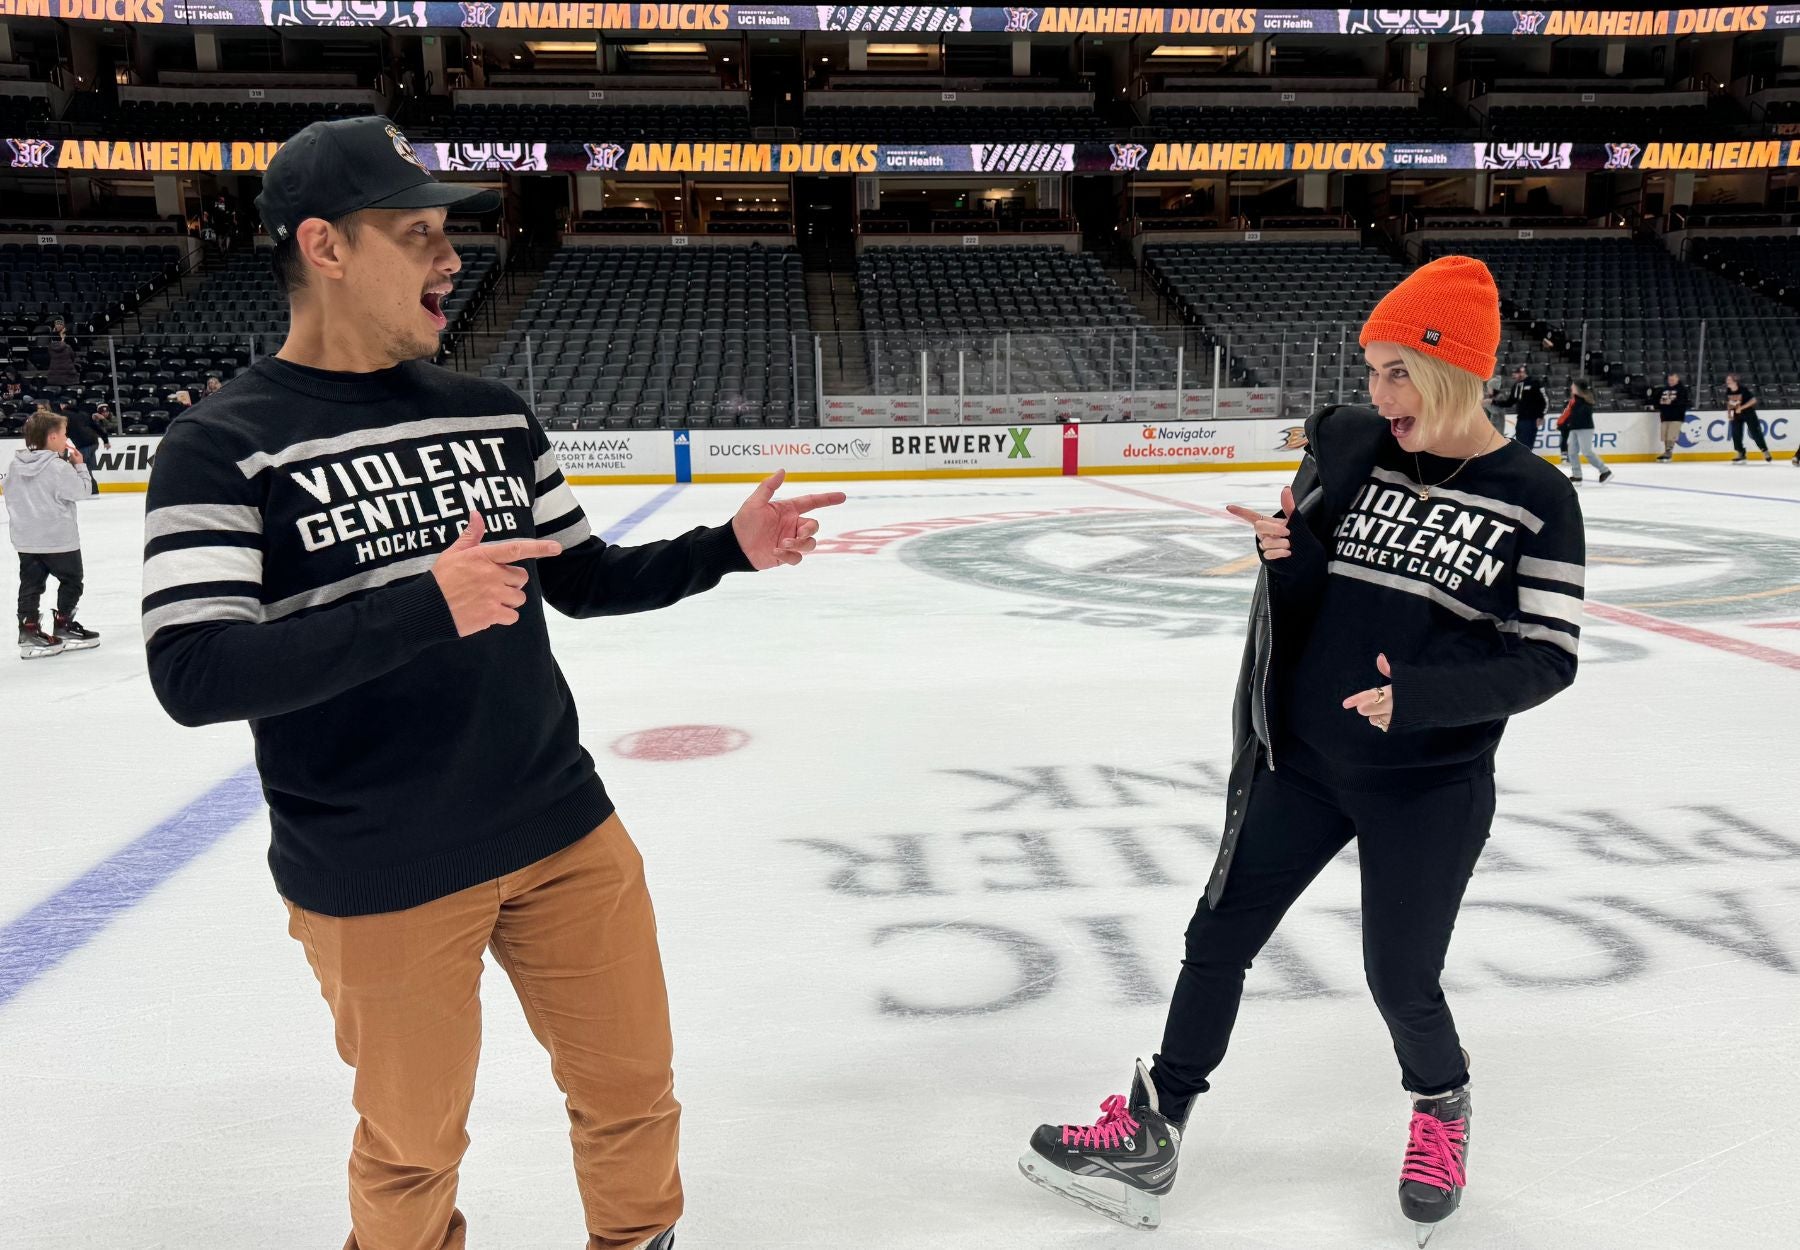 Orquest aedelweiss Hockey Clothing Company visits Honda Center, the home of the Anaheim Ducks for a hockey game against the Vegas Golden Knights. Here are some of our favorite memories skating on the ice after the game.